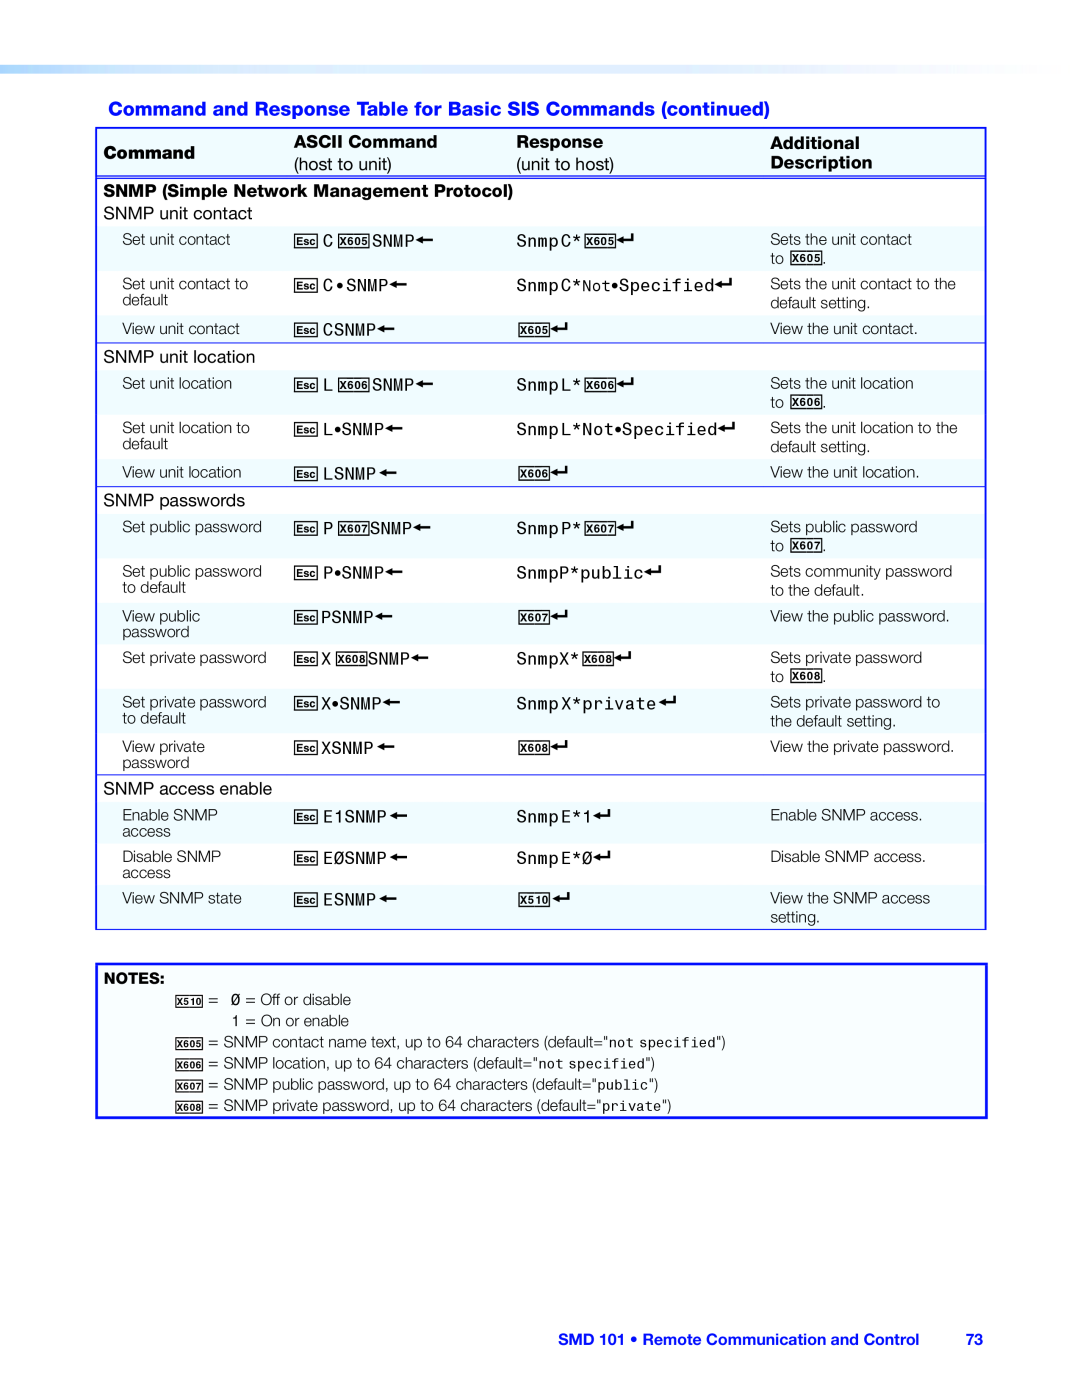 Extron electronic SMD 101 manual Command and Response Table for Basic SIS Commands continued 